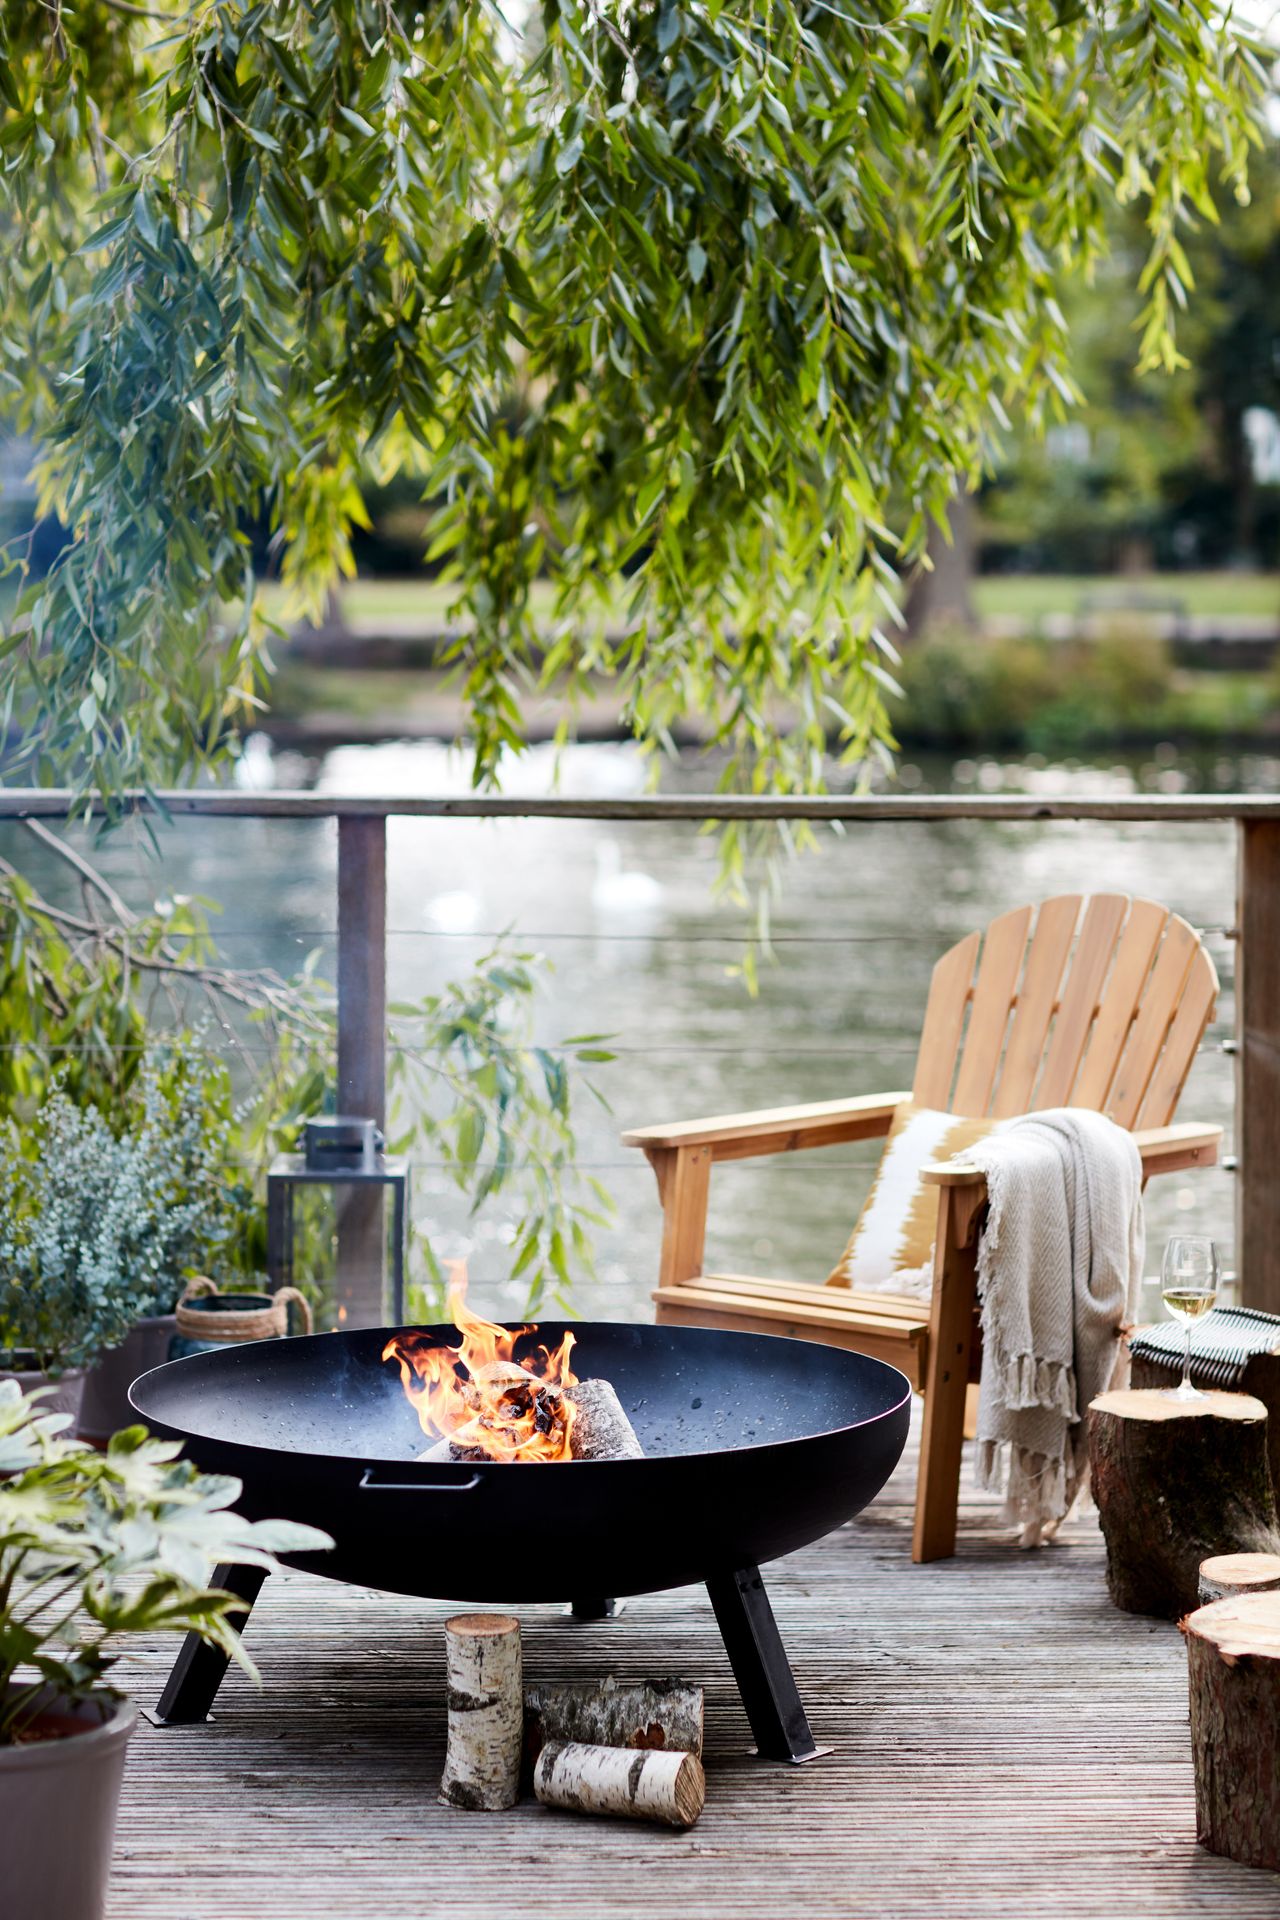 Heat Up the Outdoors and Add Value to Your Home